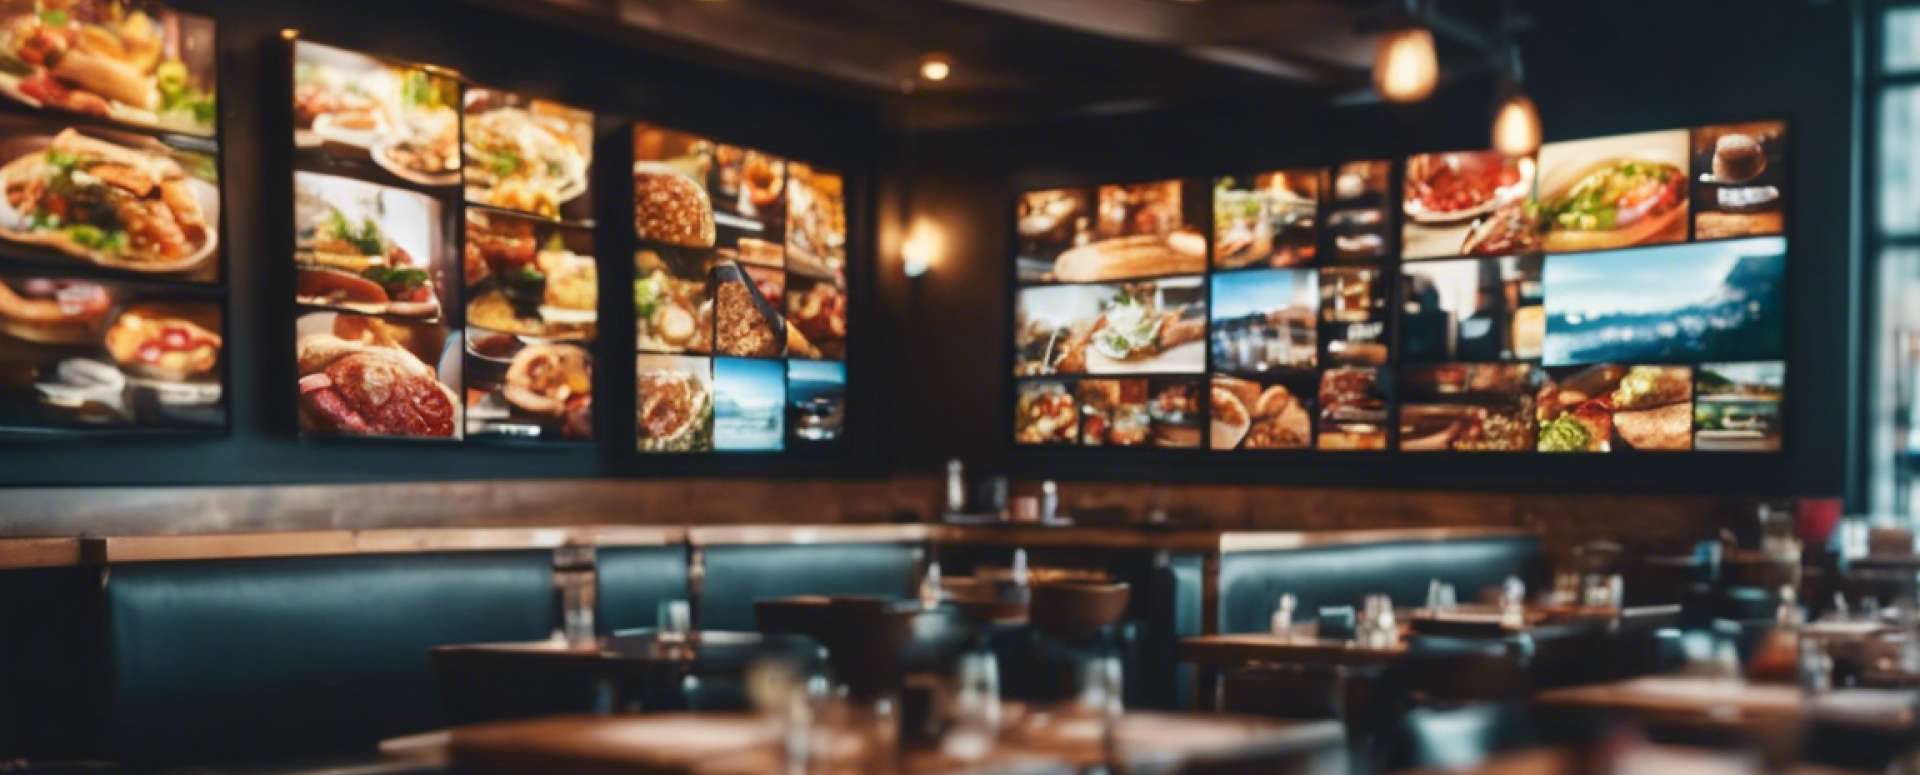 325962 infoscreens in a restaurant or store   xl 1024 v1 0